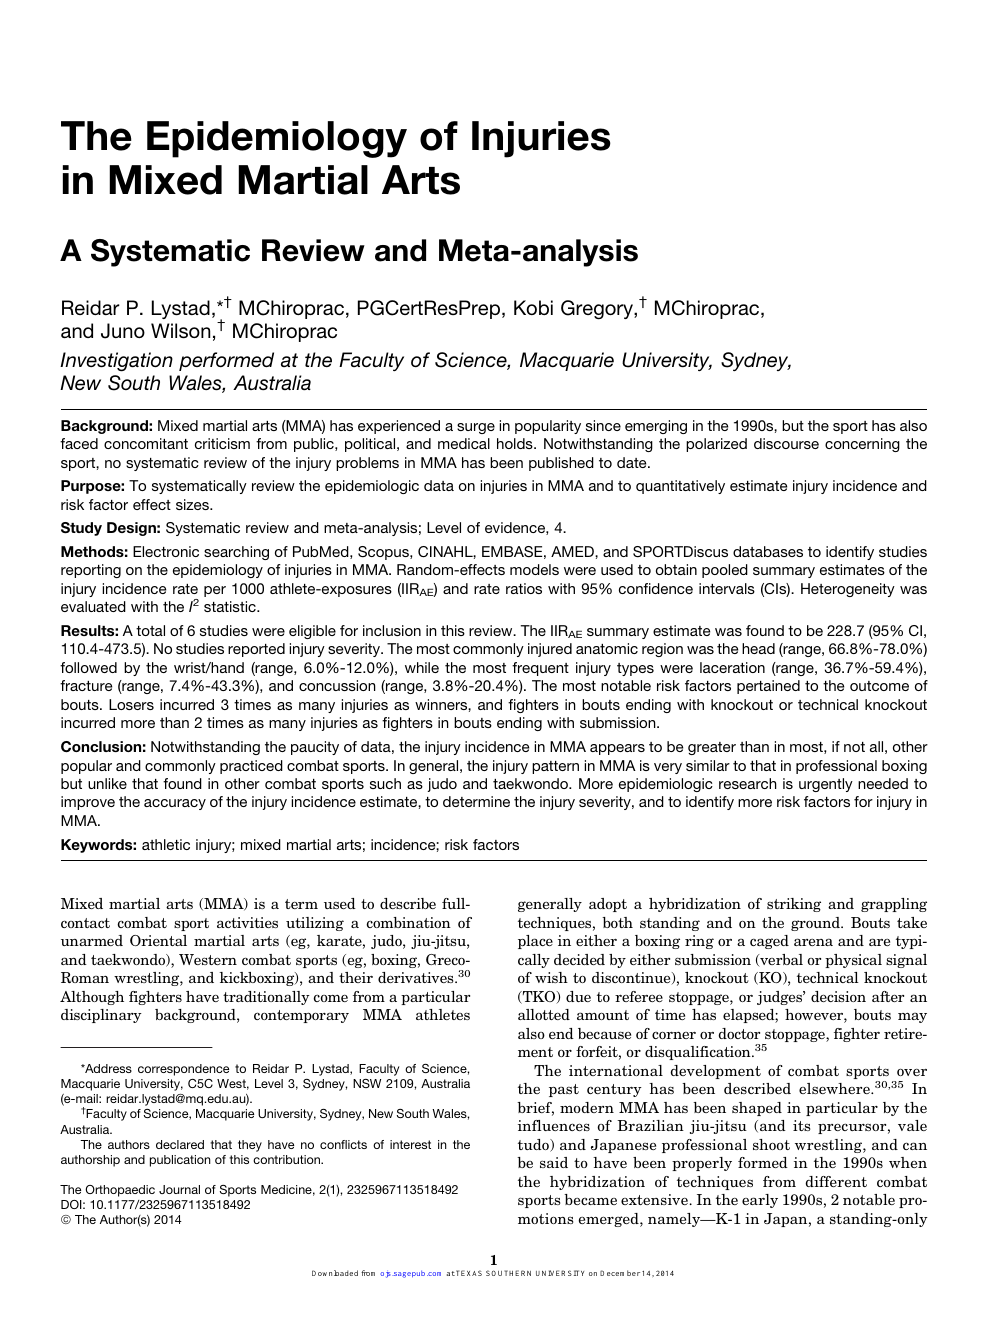 The Epidemiology of Injuries in Mixed Martial Arts A Systematic Review and Meta-analysis photo photo